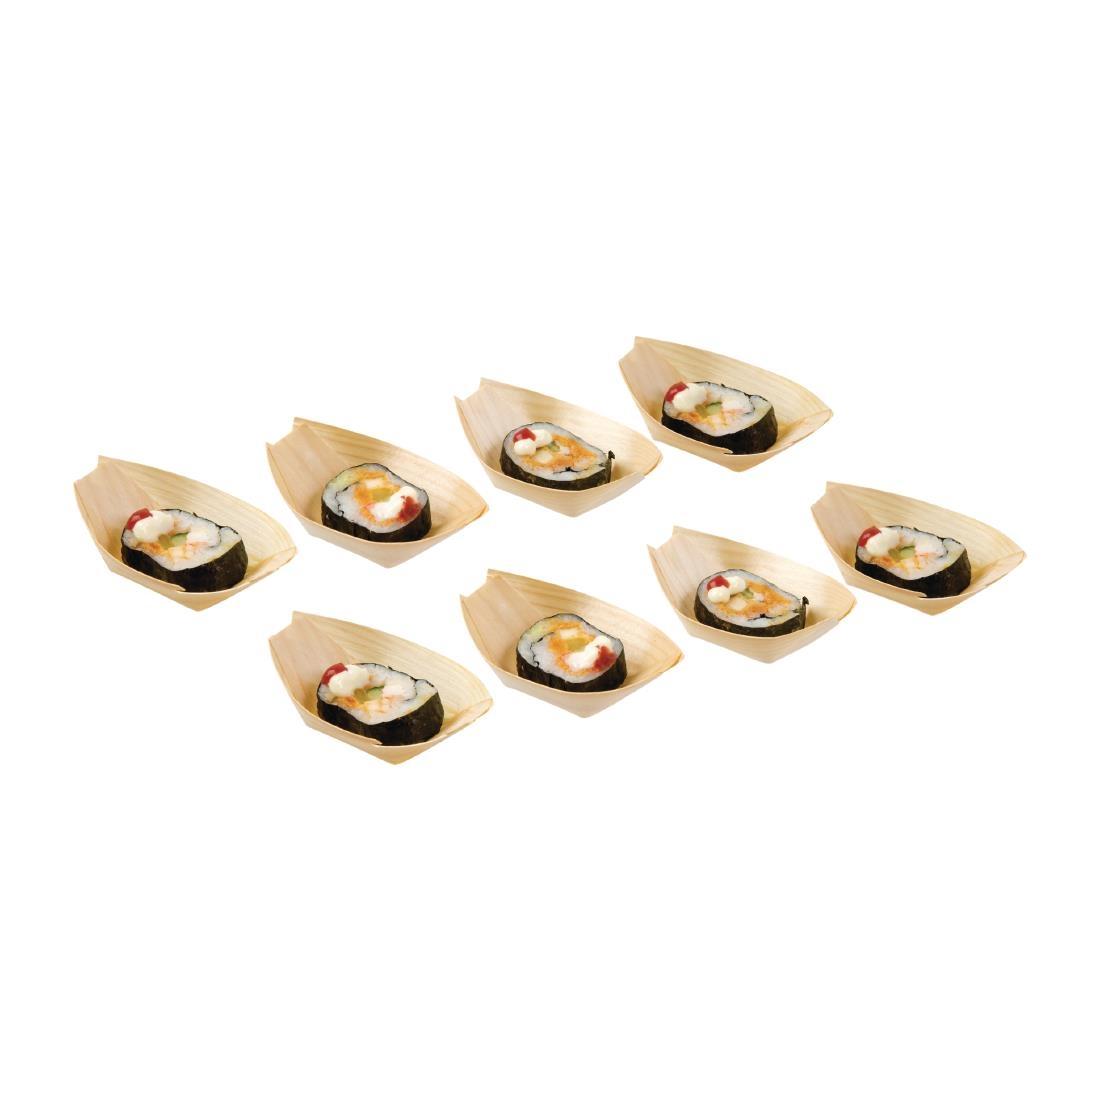 Fiesta Compostable Wooden Sushi Boats Small 80mm (Pack of 100) - DK383  - 6